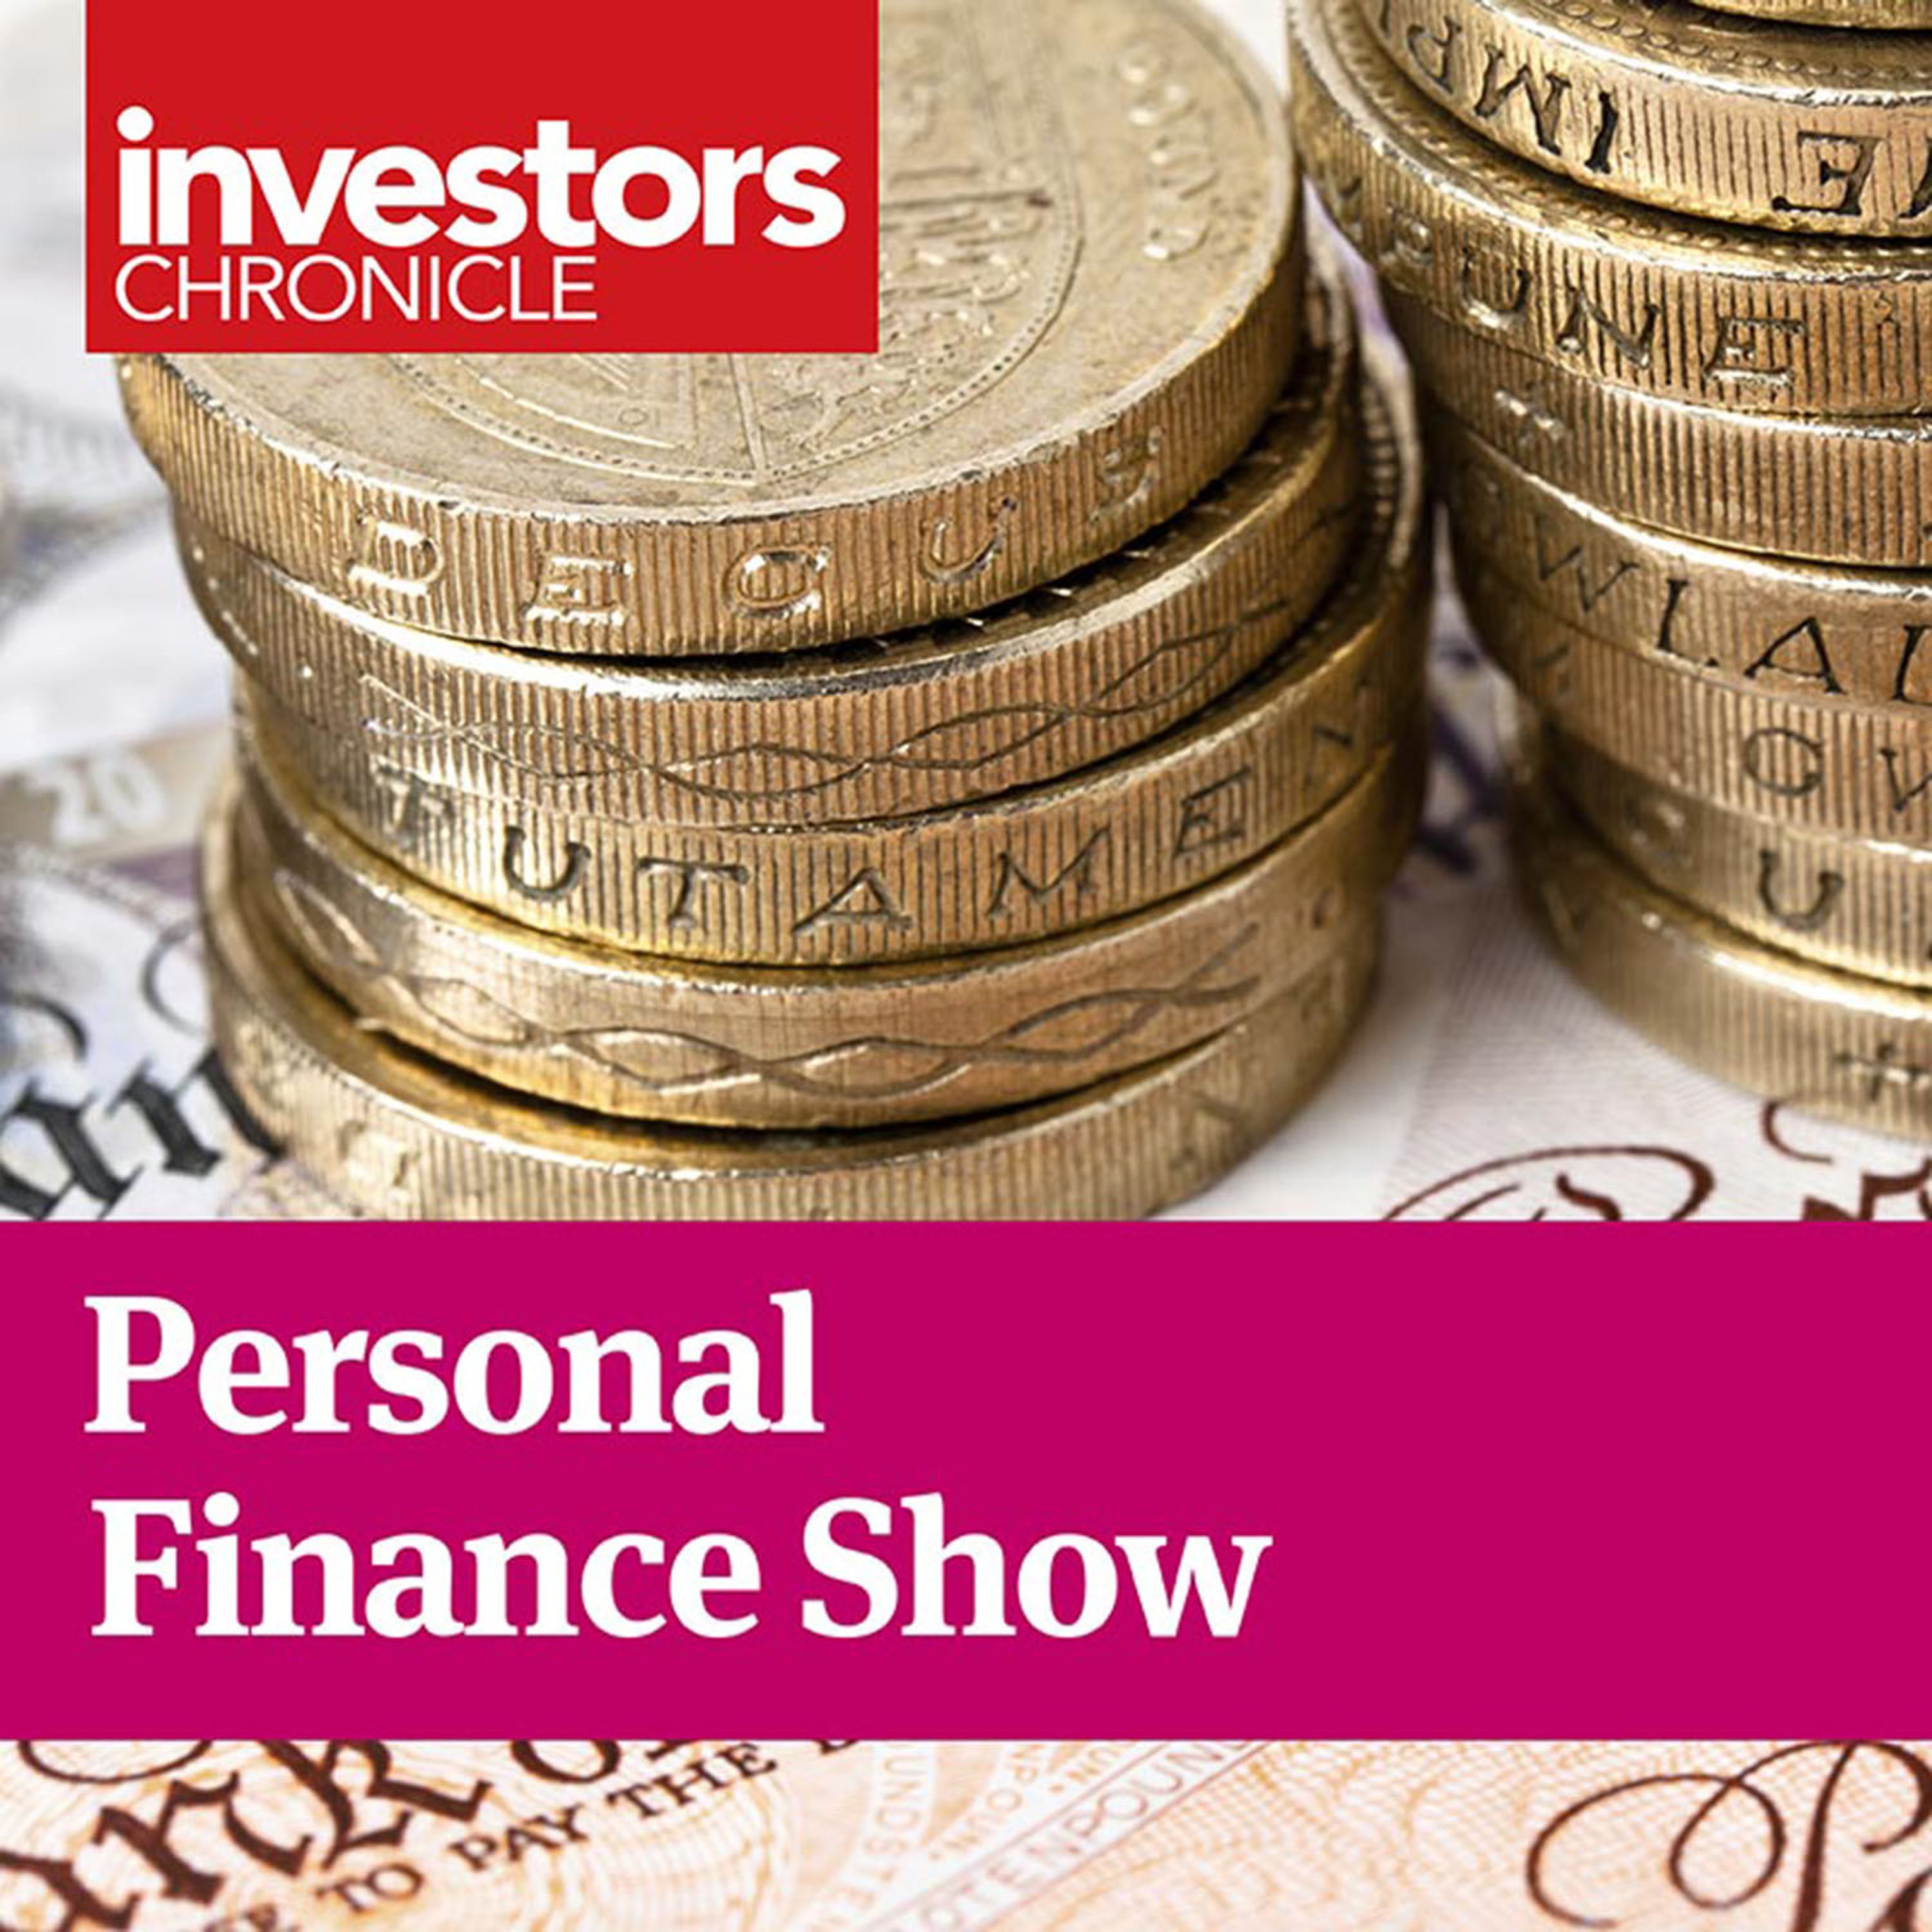 Personal Finance Show: Emerging market dips and inflation-busting assets